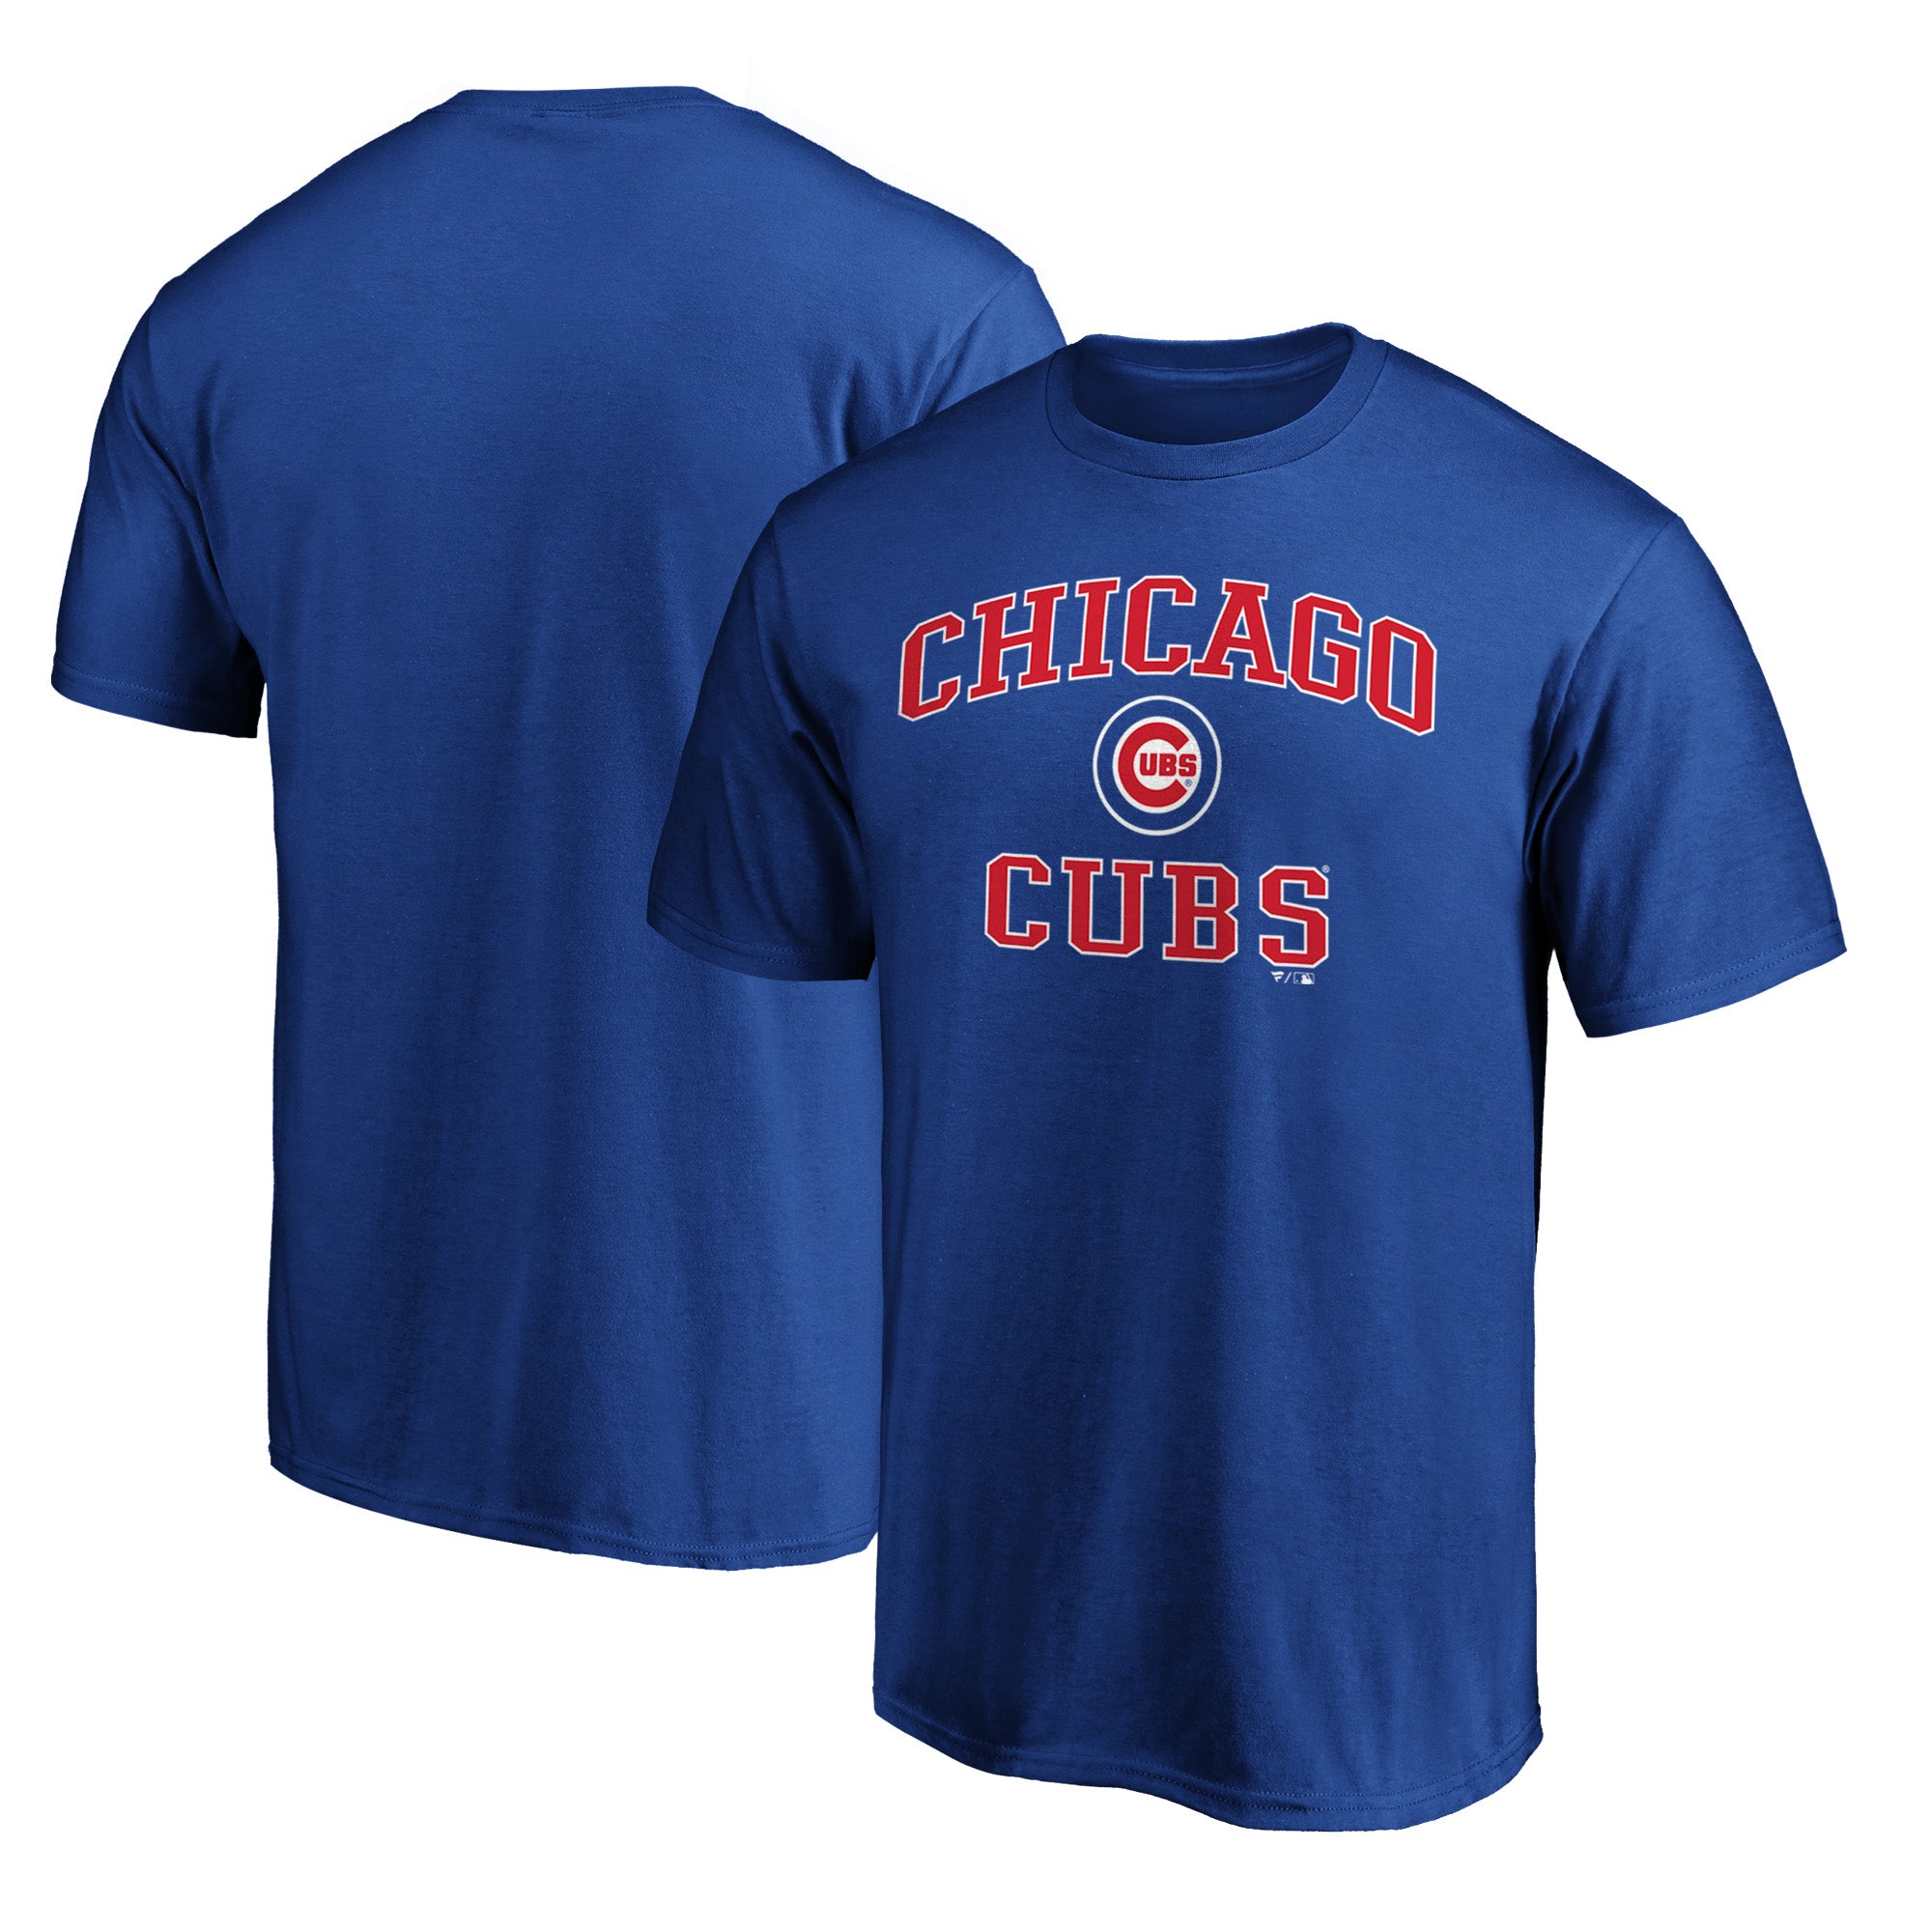  Majestic Chicago Cubs T-Shirt (Adult XX-Large